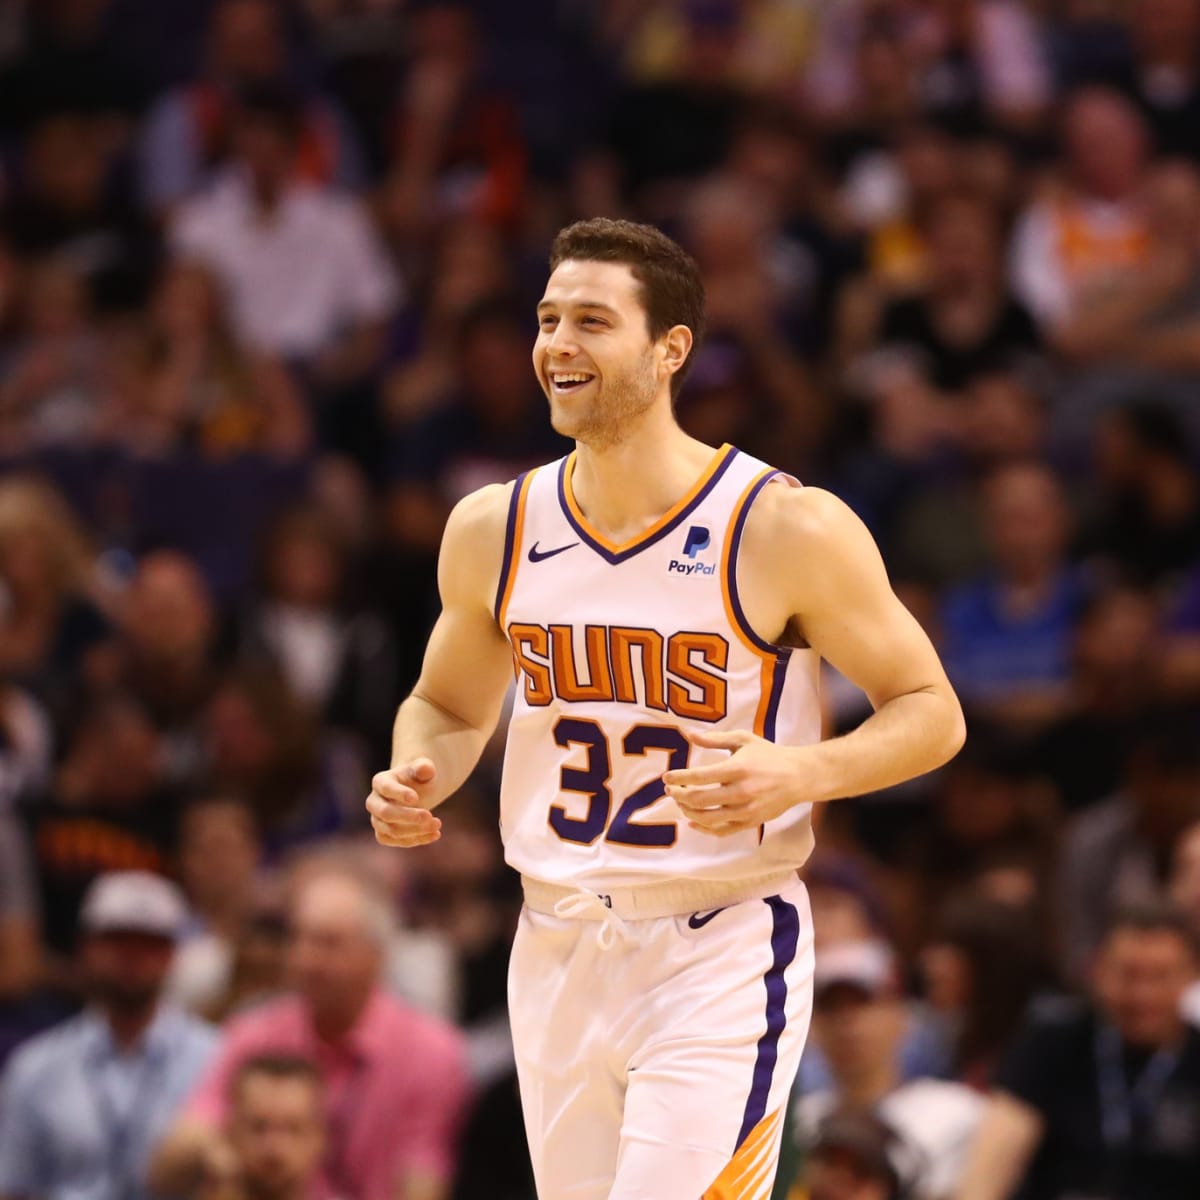 Former BYU star Jimmer Fredette returns to the NBA, signs a two